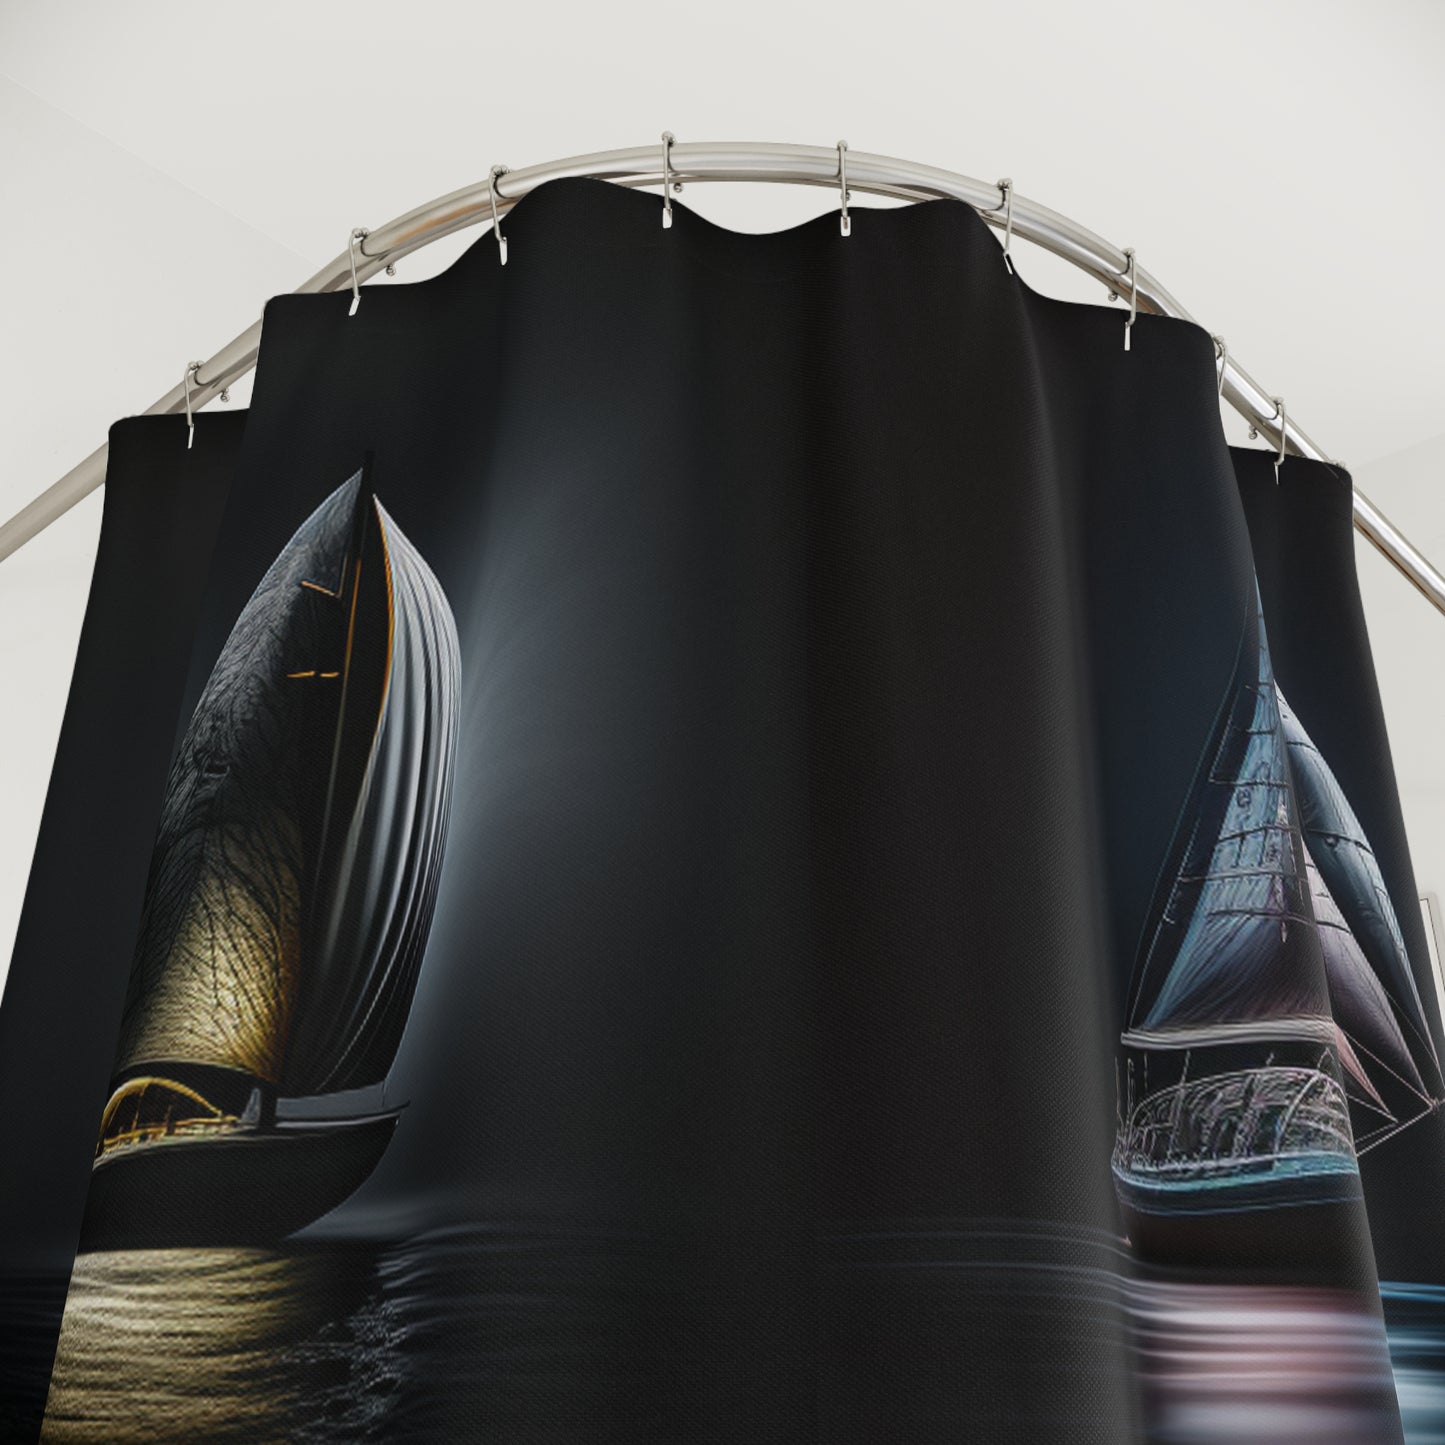 Polyester Shower Curtain glow sailboat 4 pack